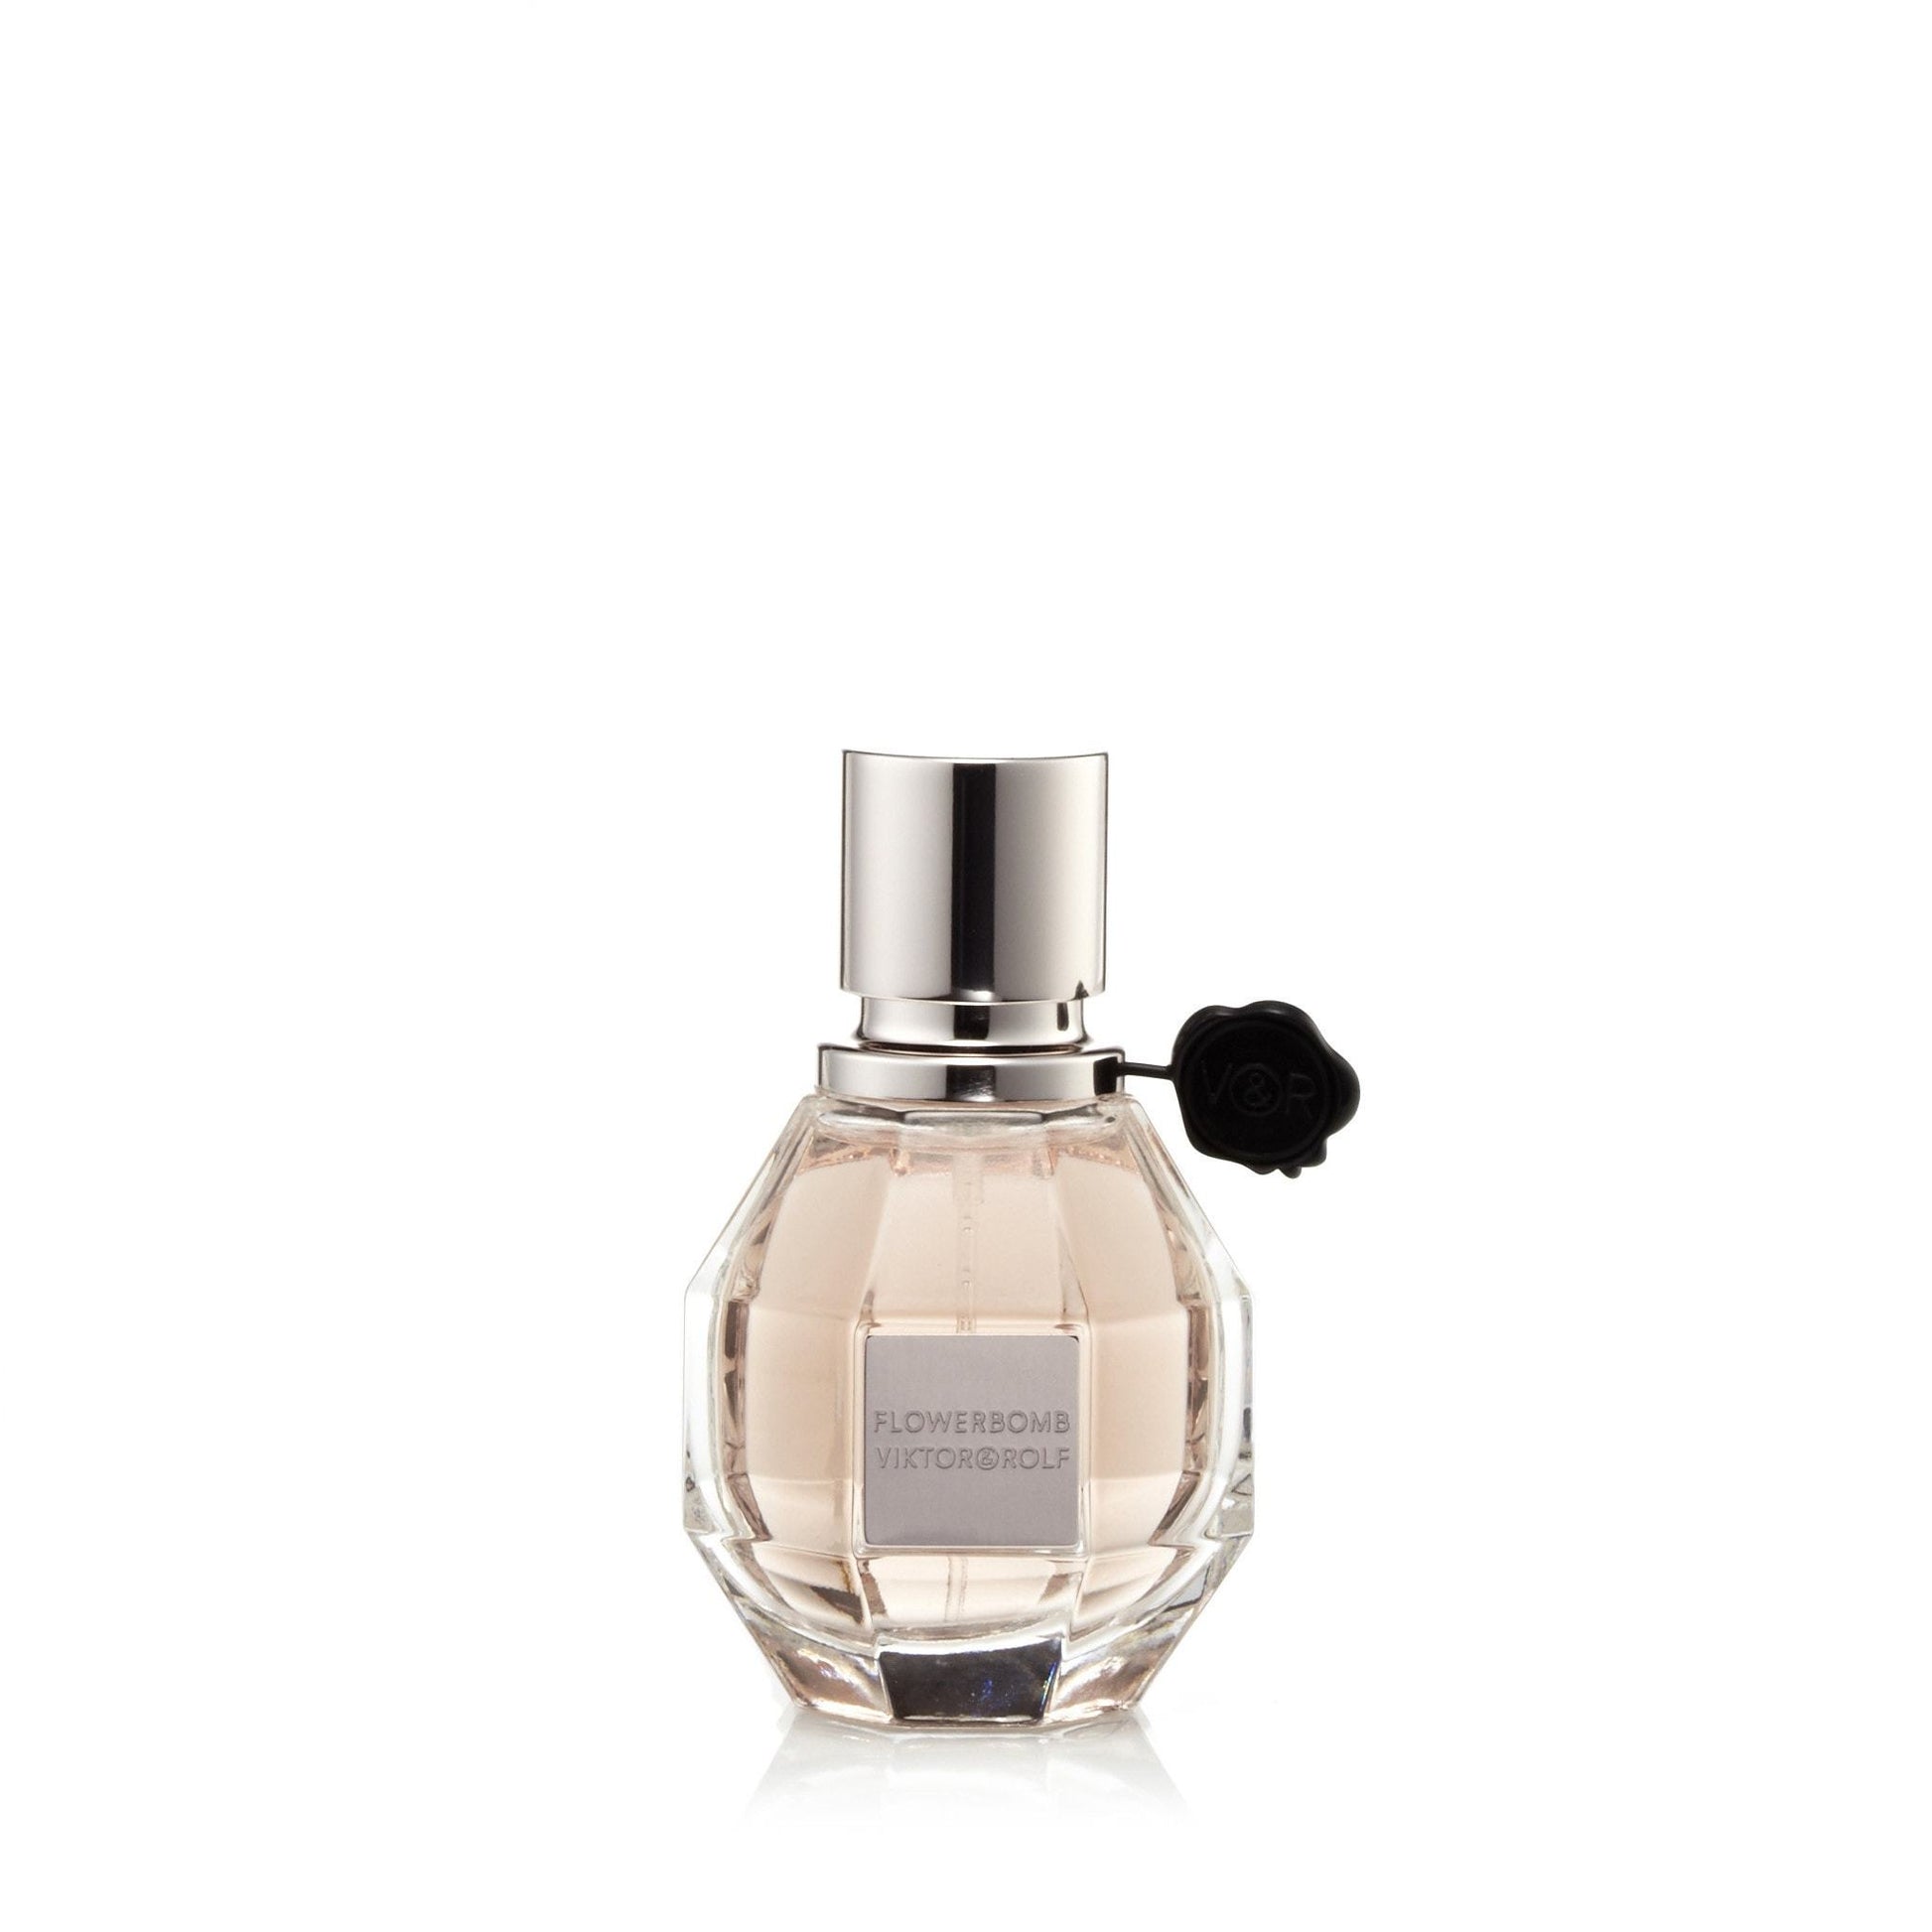 Flowerbomb EDP for Women by Viktor & Rolf, Product image 3